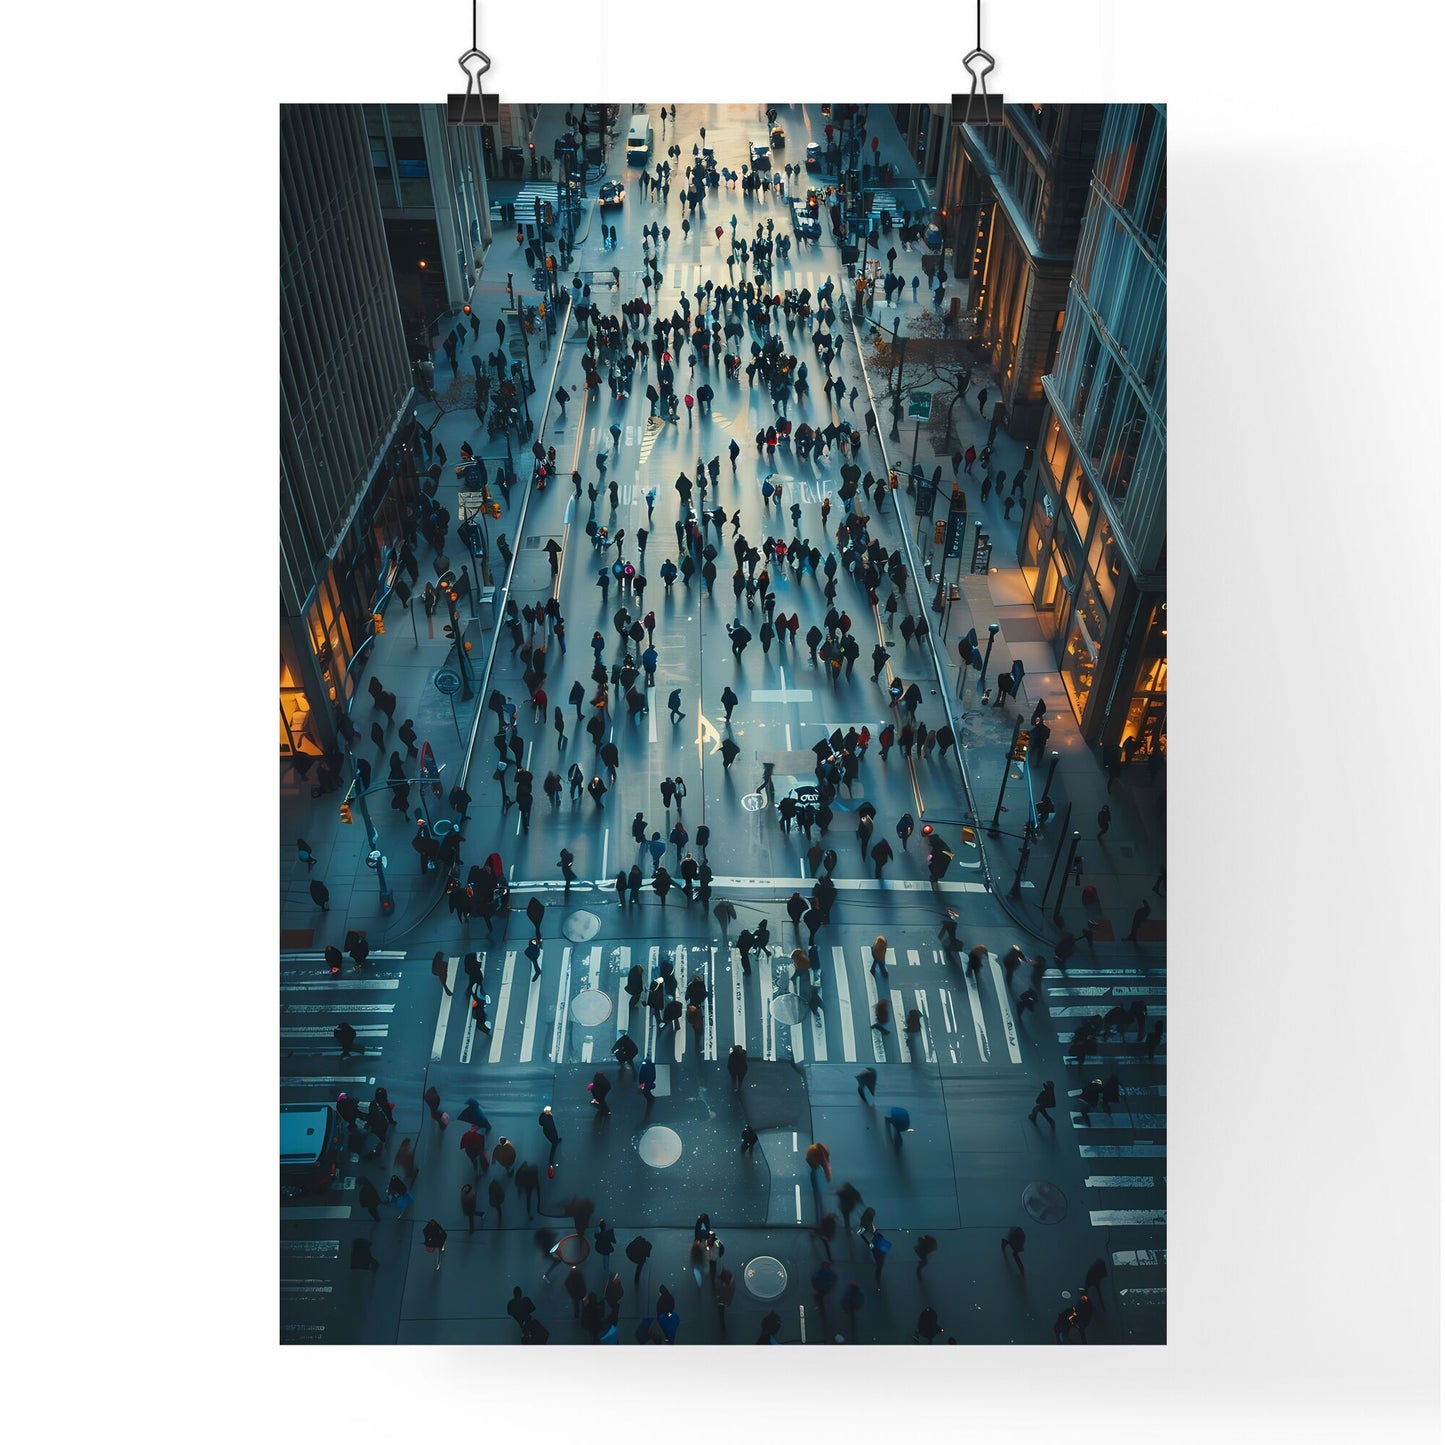 Vibrant City Scene Depicting Crowds, Blockchain Technology, and Currency Default Title